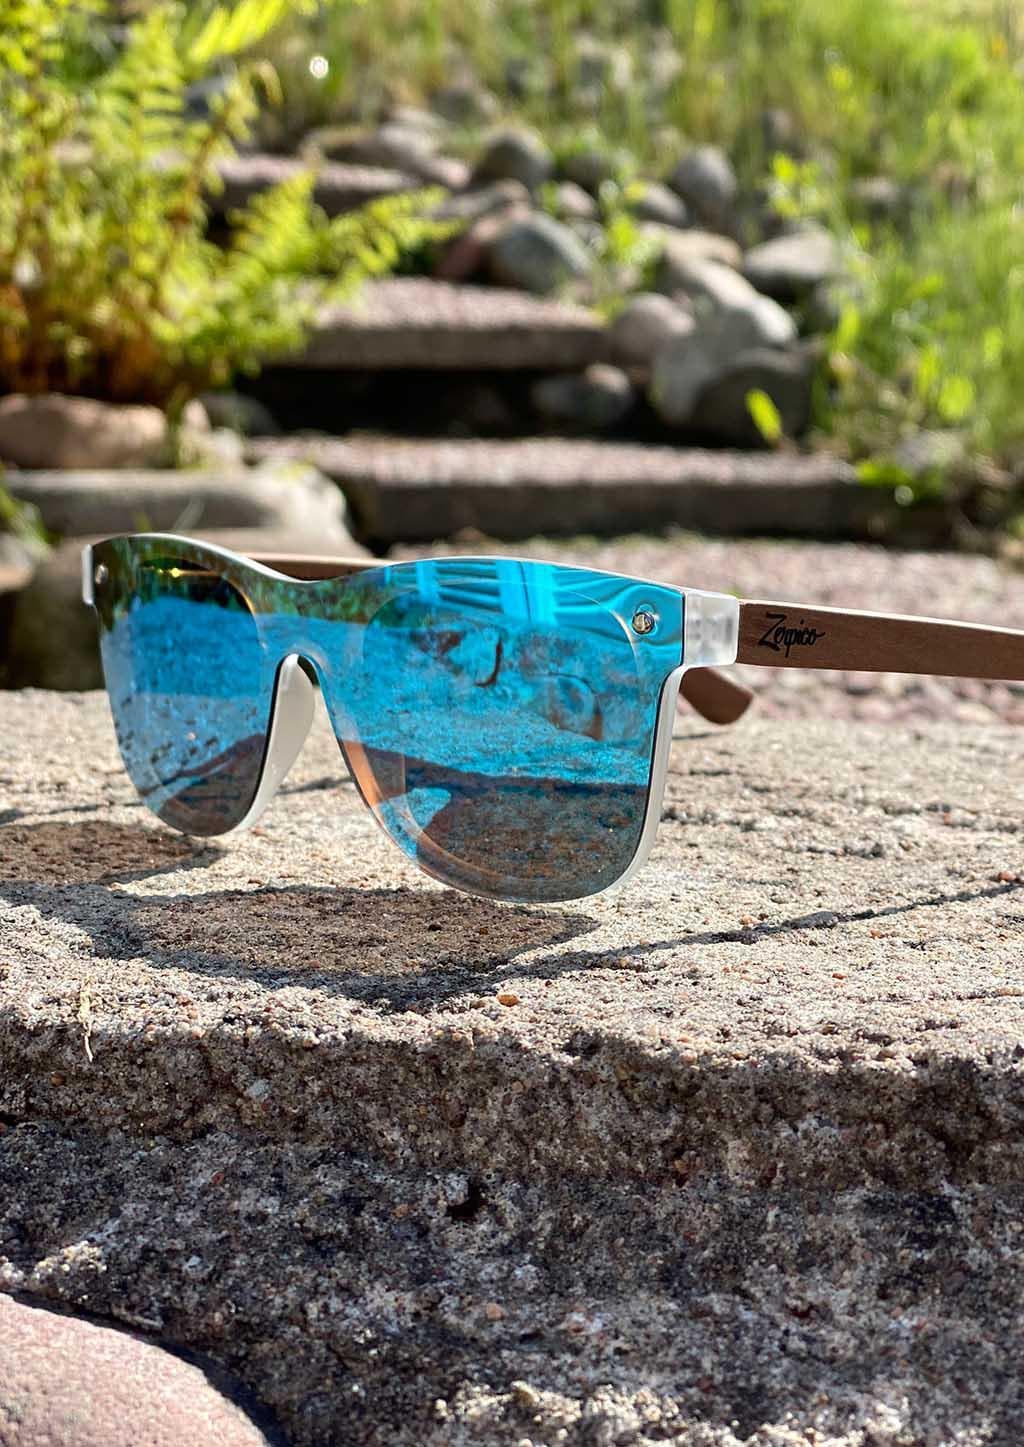 Eyewood tomorrow is our modern cool take on classic models. This is Gemeni with blue mirror lenses. Nice wooden sunglasses. Front in the sun.